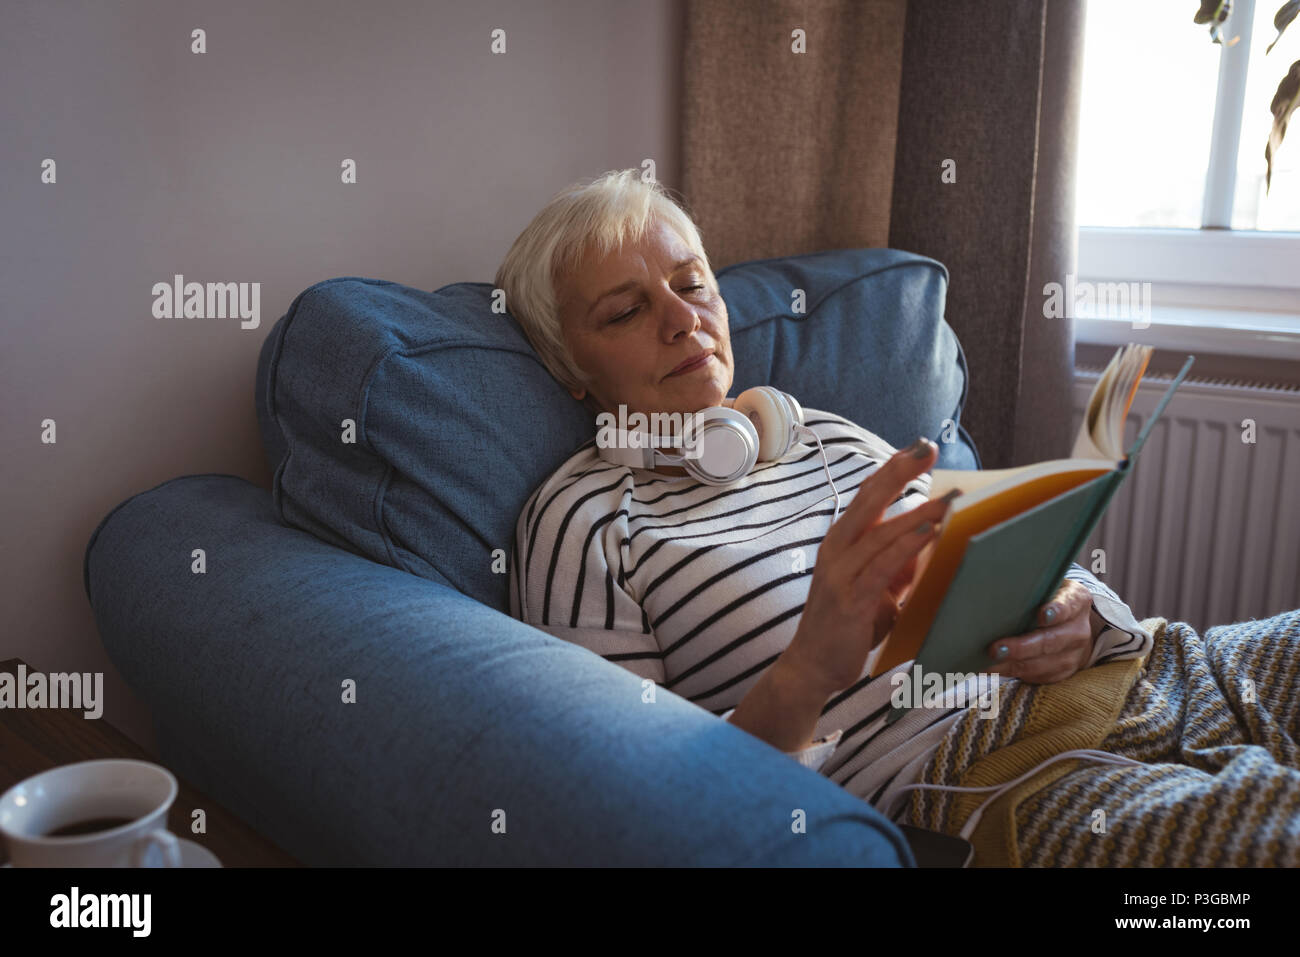 Senior woman relaxing on a sofa reading a book in living room Stock Photo